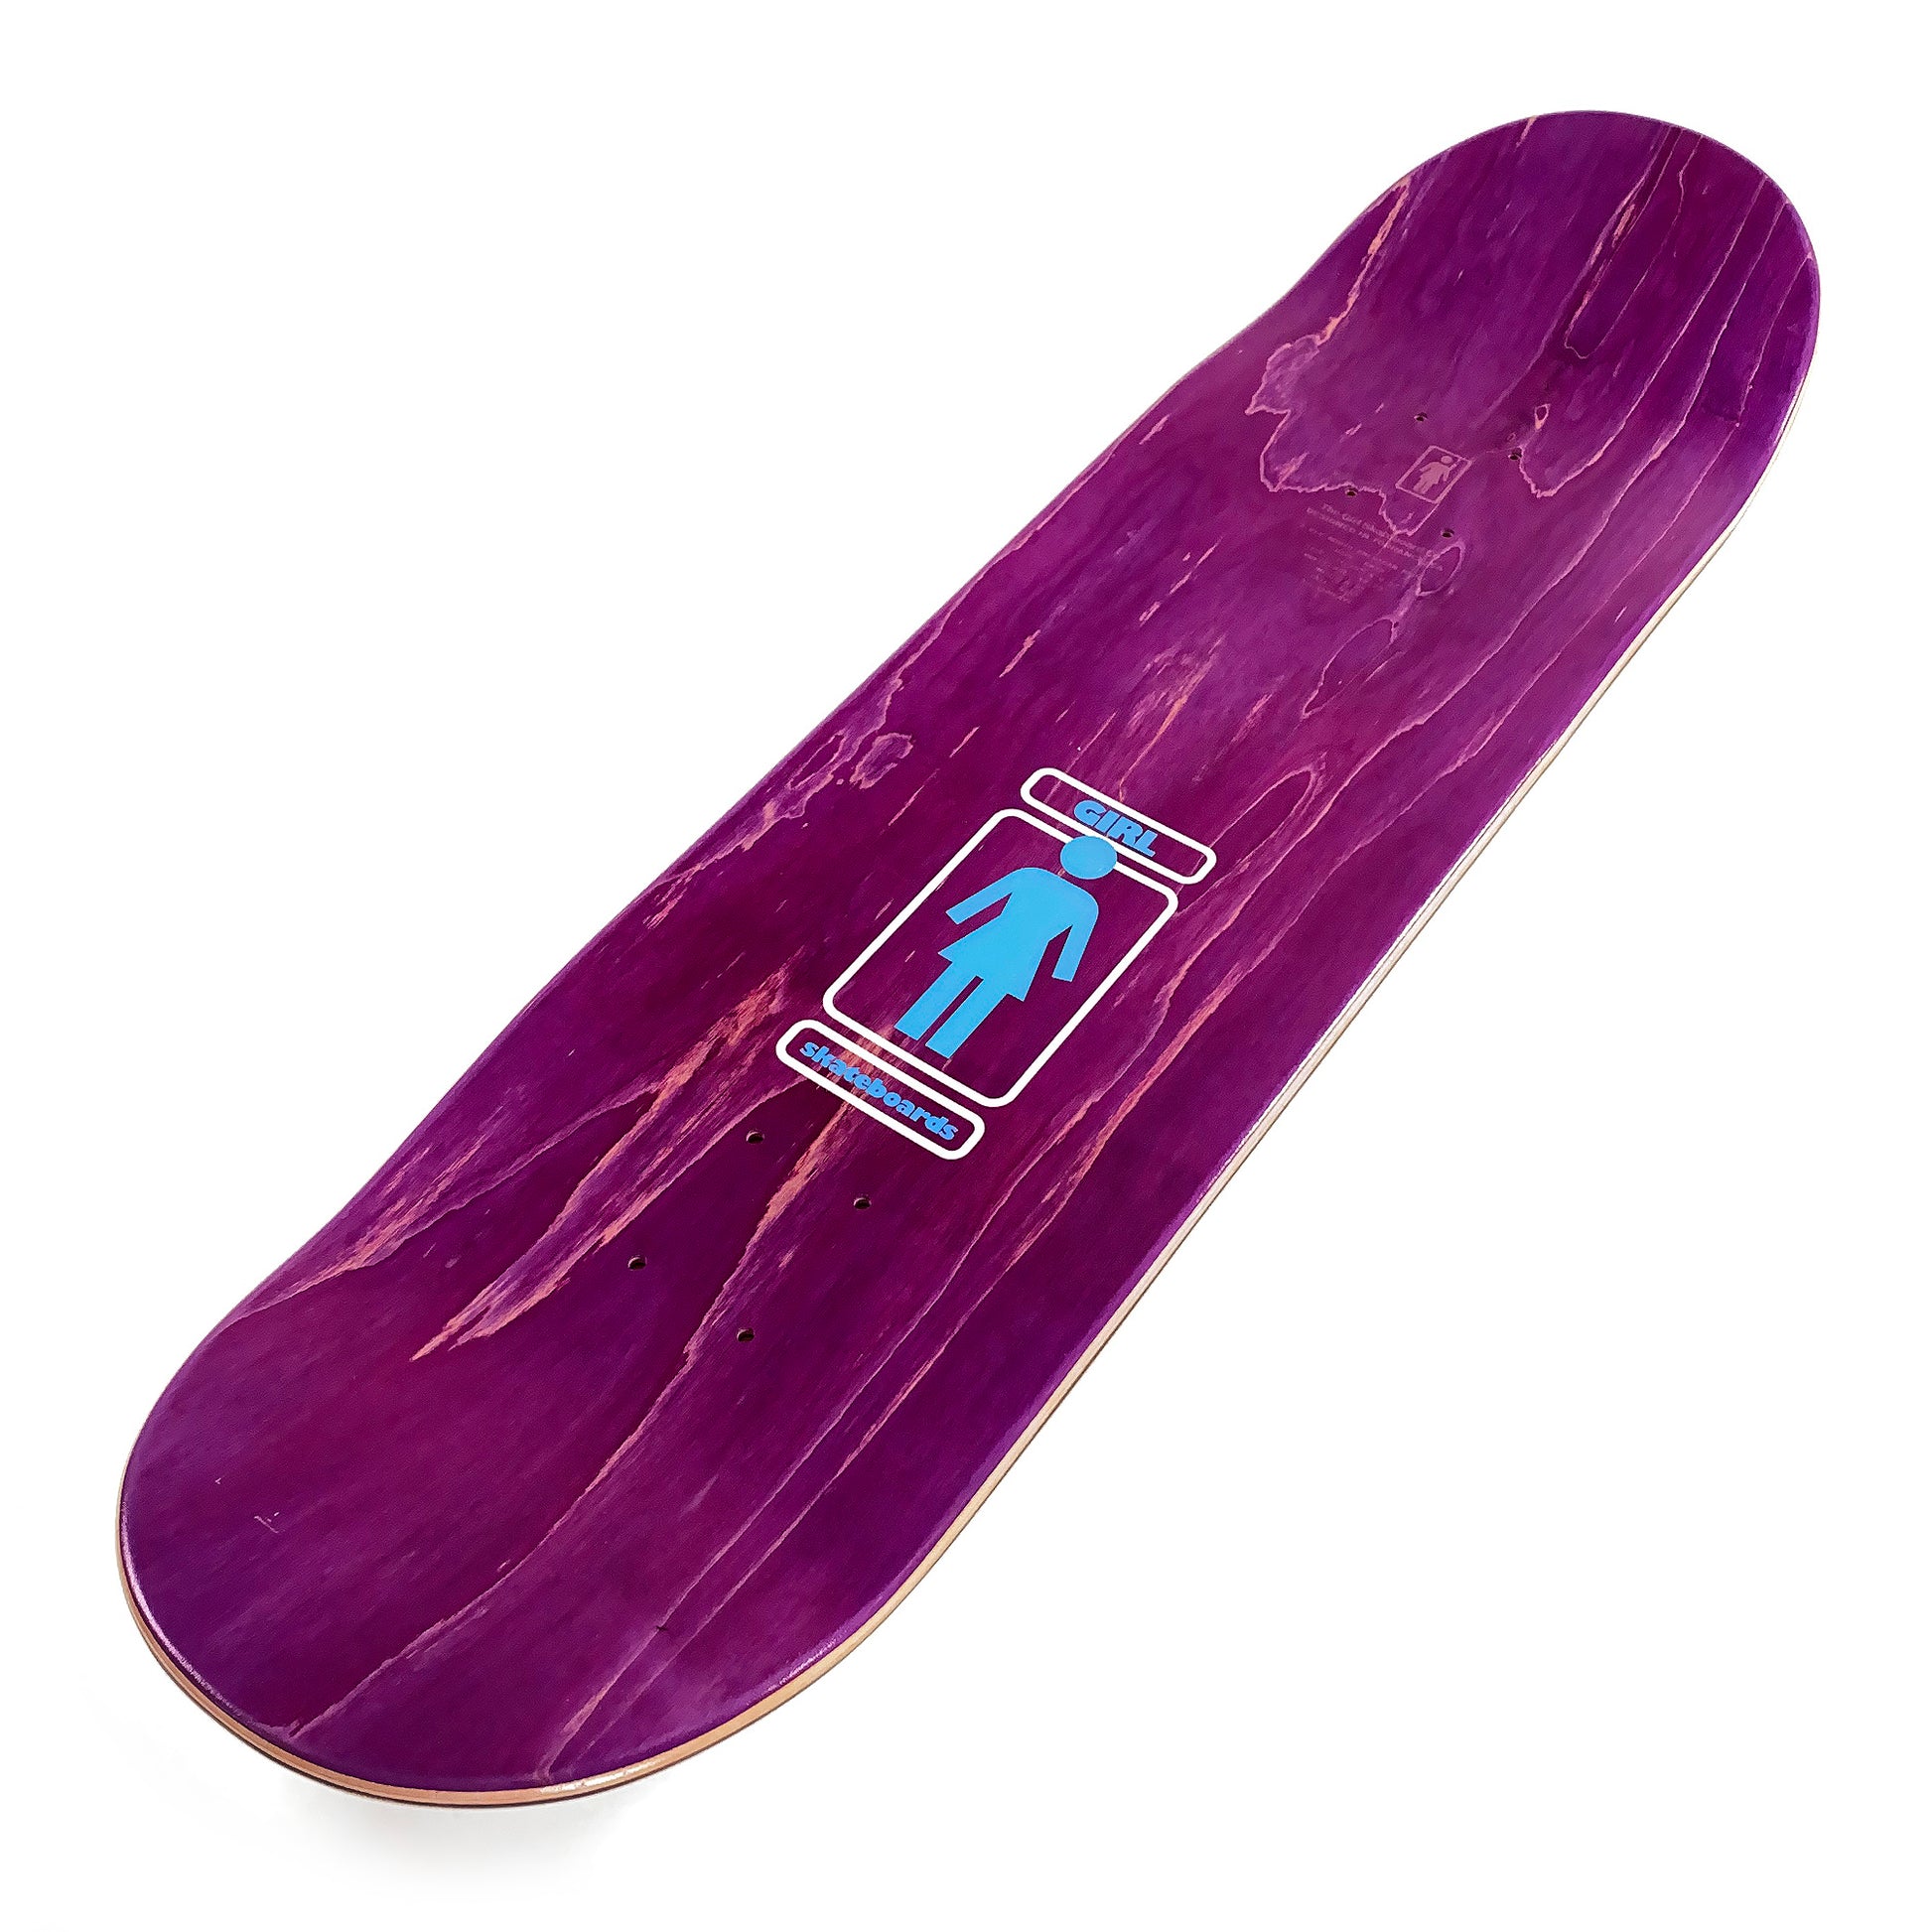 Girl - 7.75" - Cory Kennedy 93 Til W43D2 Deck - Prime Delux Store